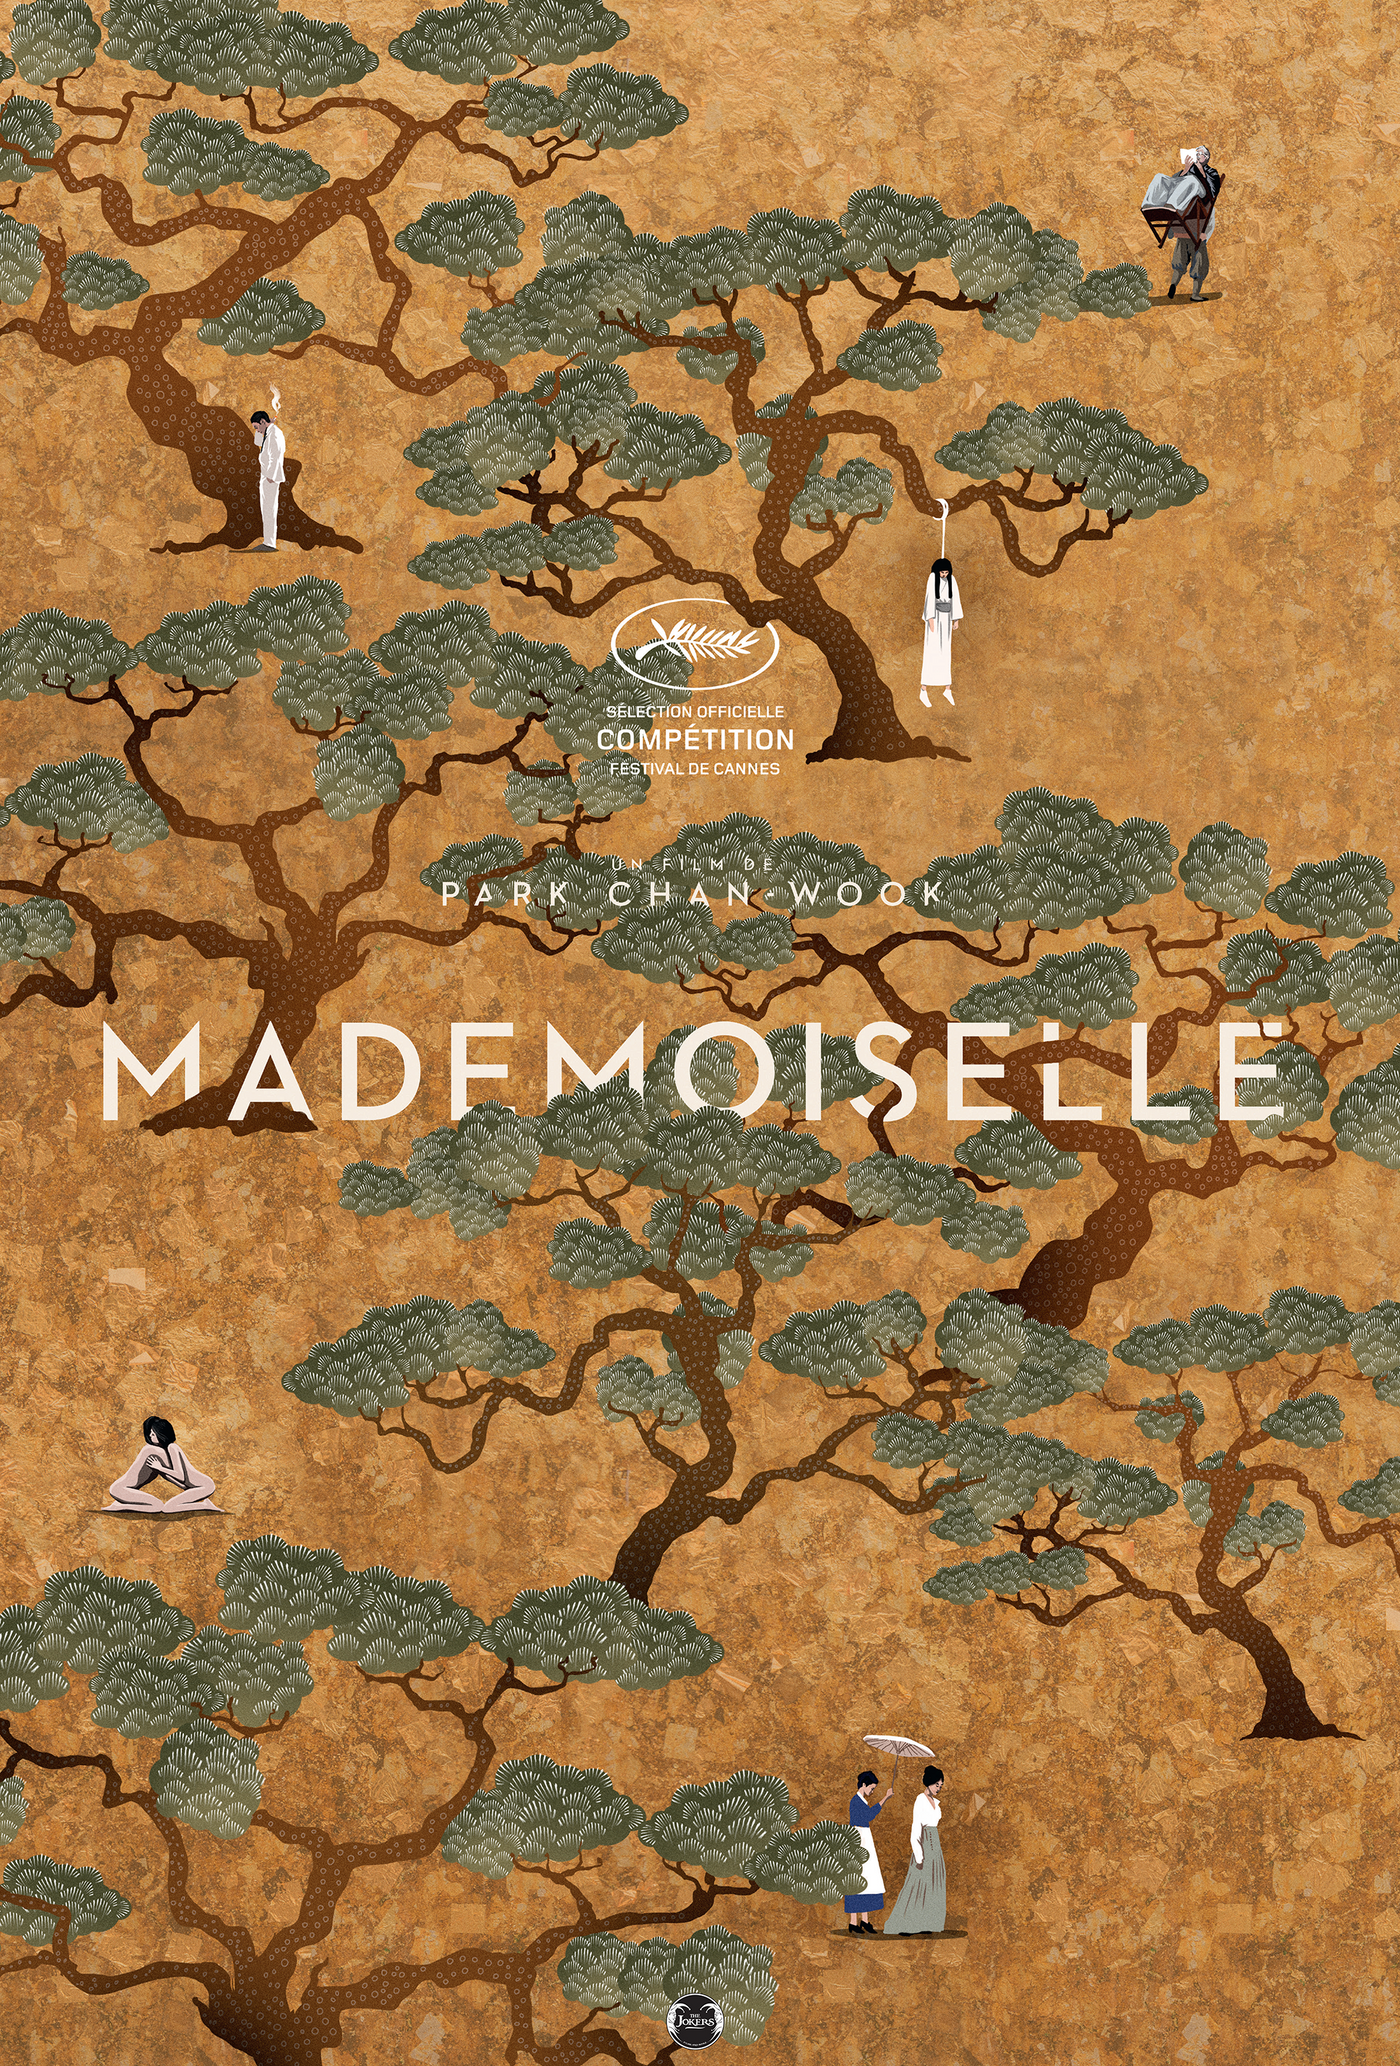 Affiche Collector "Mademoiselle"